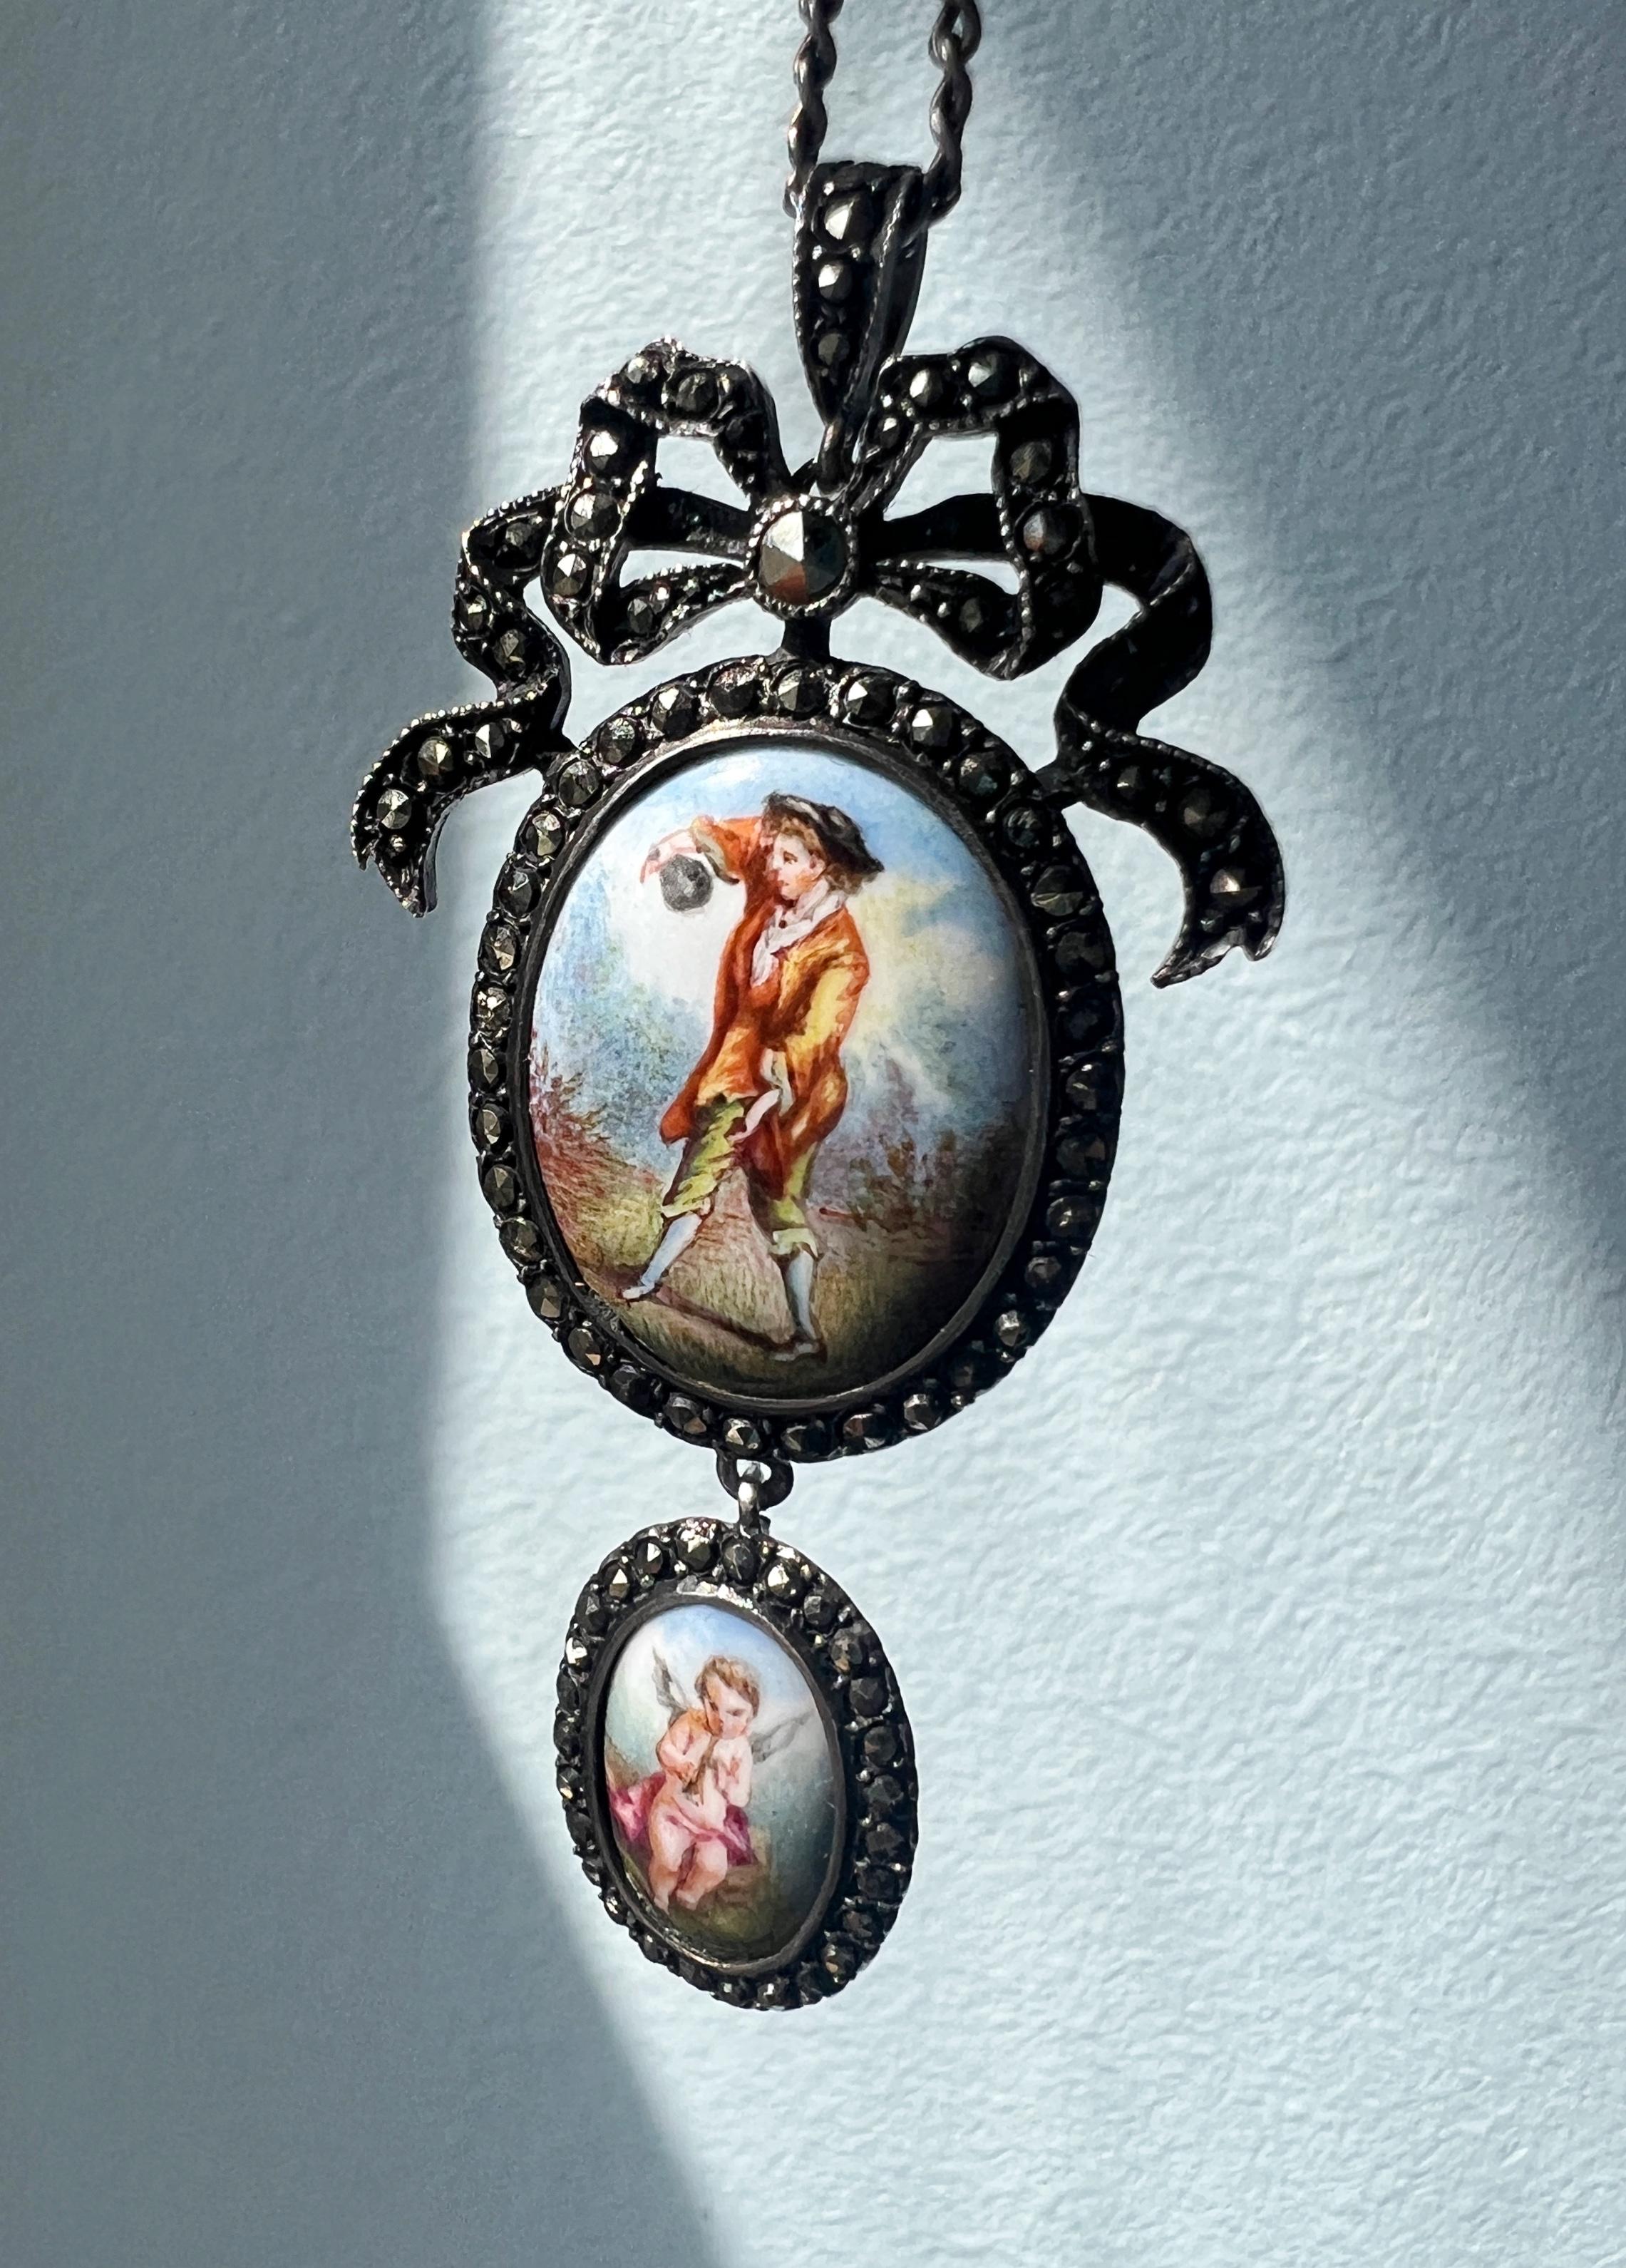 For sale an exquisite Victorian-era antique pendant, a true marvel of artistry and sentimentality. This pendant showcases two incredibly detailed miniatures suspended delicately from a captivating bow. Dating back to the 19th century, this pendant